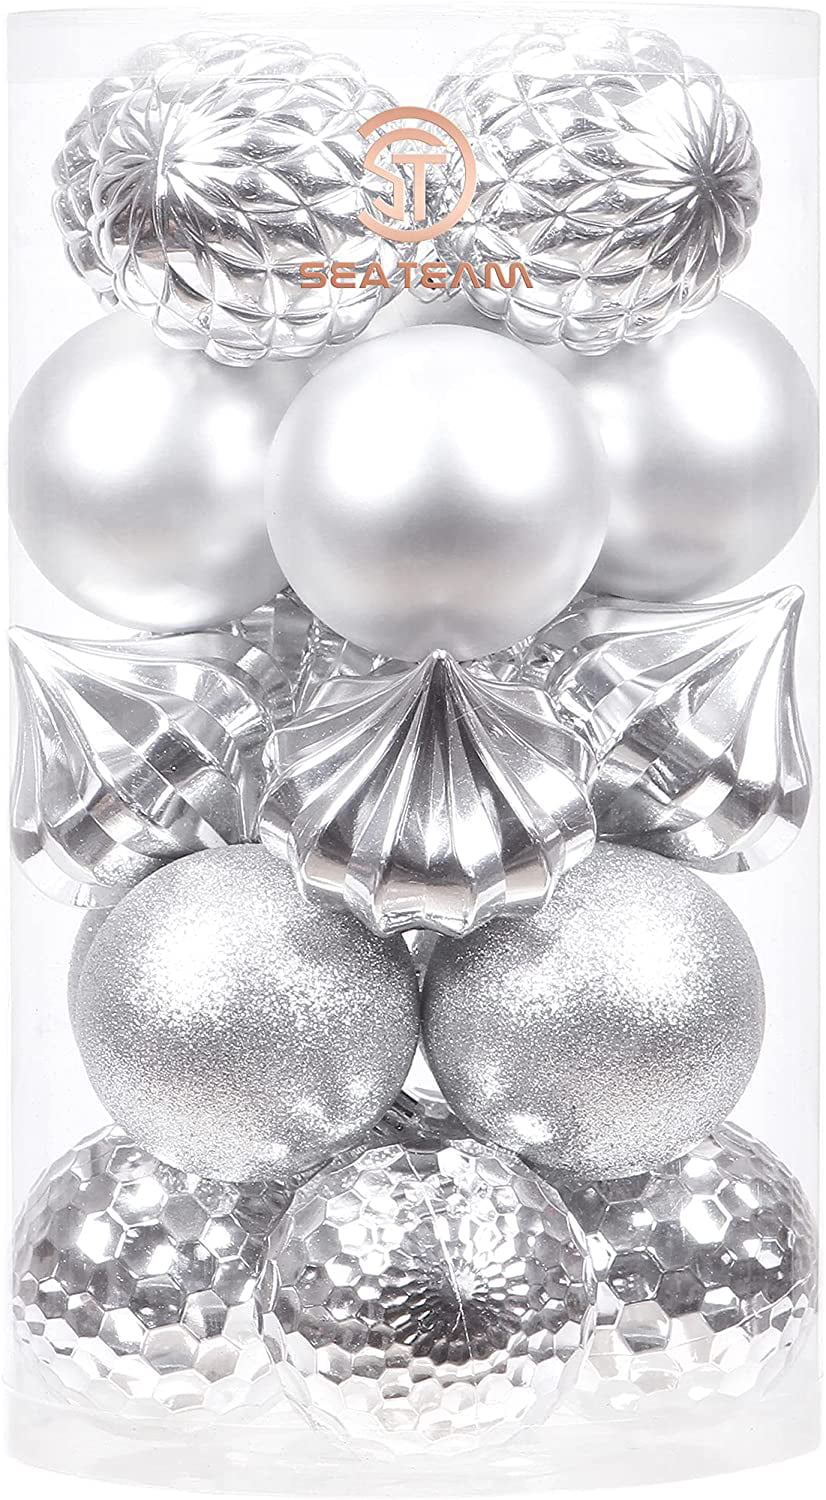 Wedding Sea Team 21-Pack Christmas Ball Ornaments with Strings Holiday Party Hanging Decorations for Xmas Tree Shatterproof Plastic Christmas Bulbs Champagne 80mm/3.15-Inch Large Size Baubles